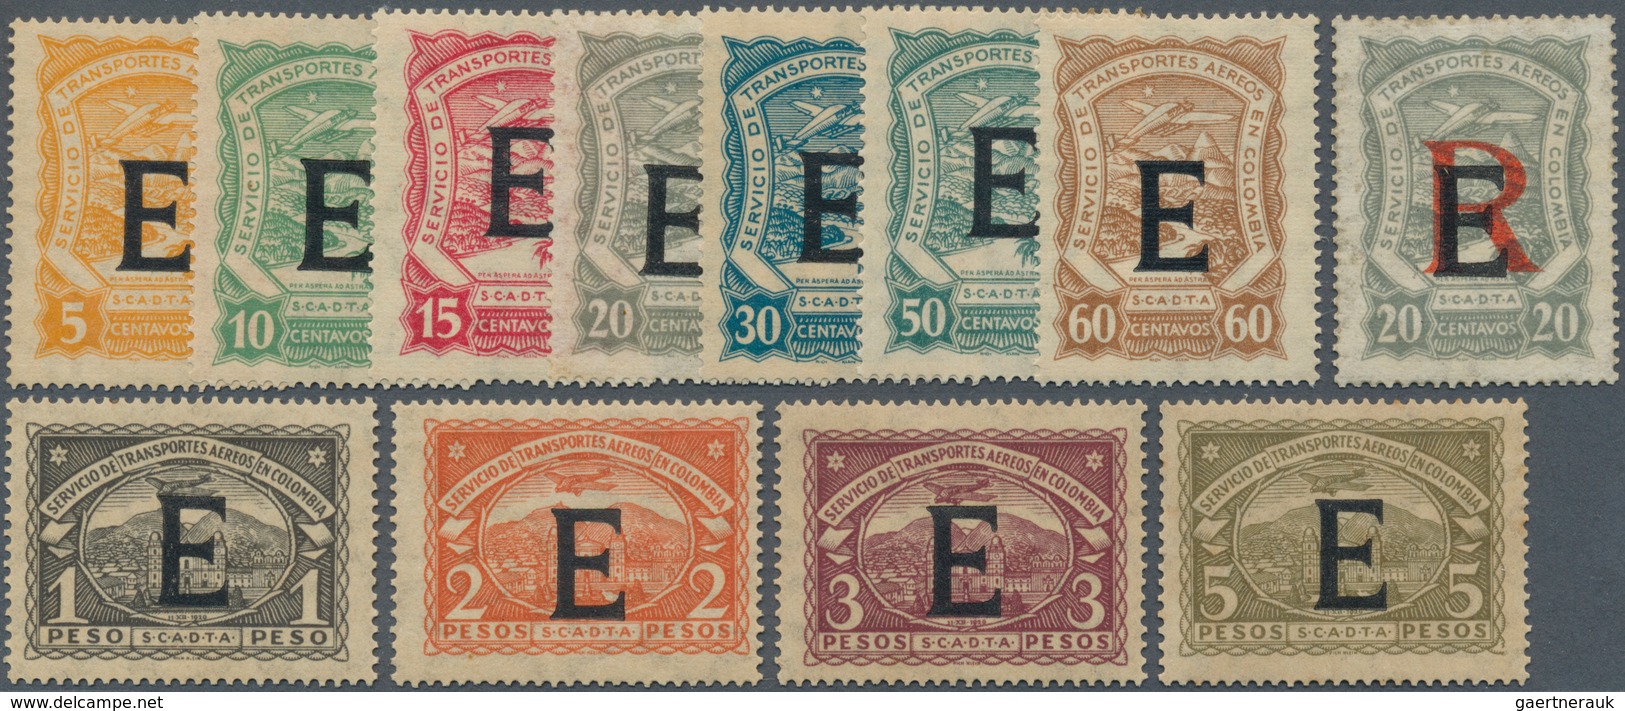 12423 SCADTA - Länder-Aufdrucke: 1923, SPAIN: Colombia Airmail Issue With Black Opt. 'E' Complete Set Of 1 - Flugzeuge